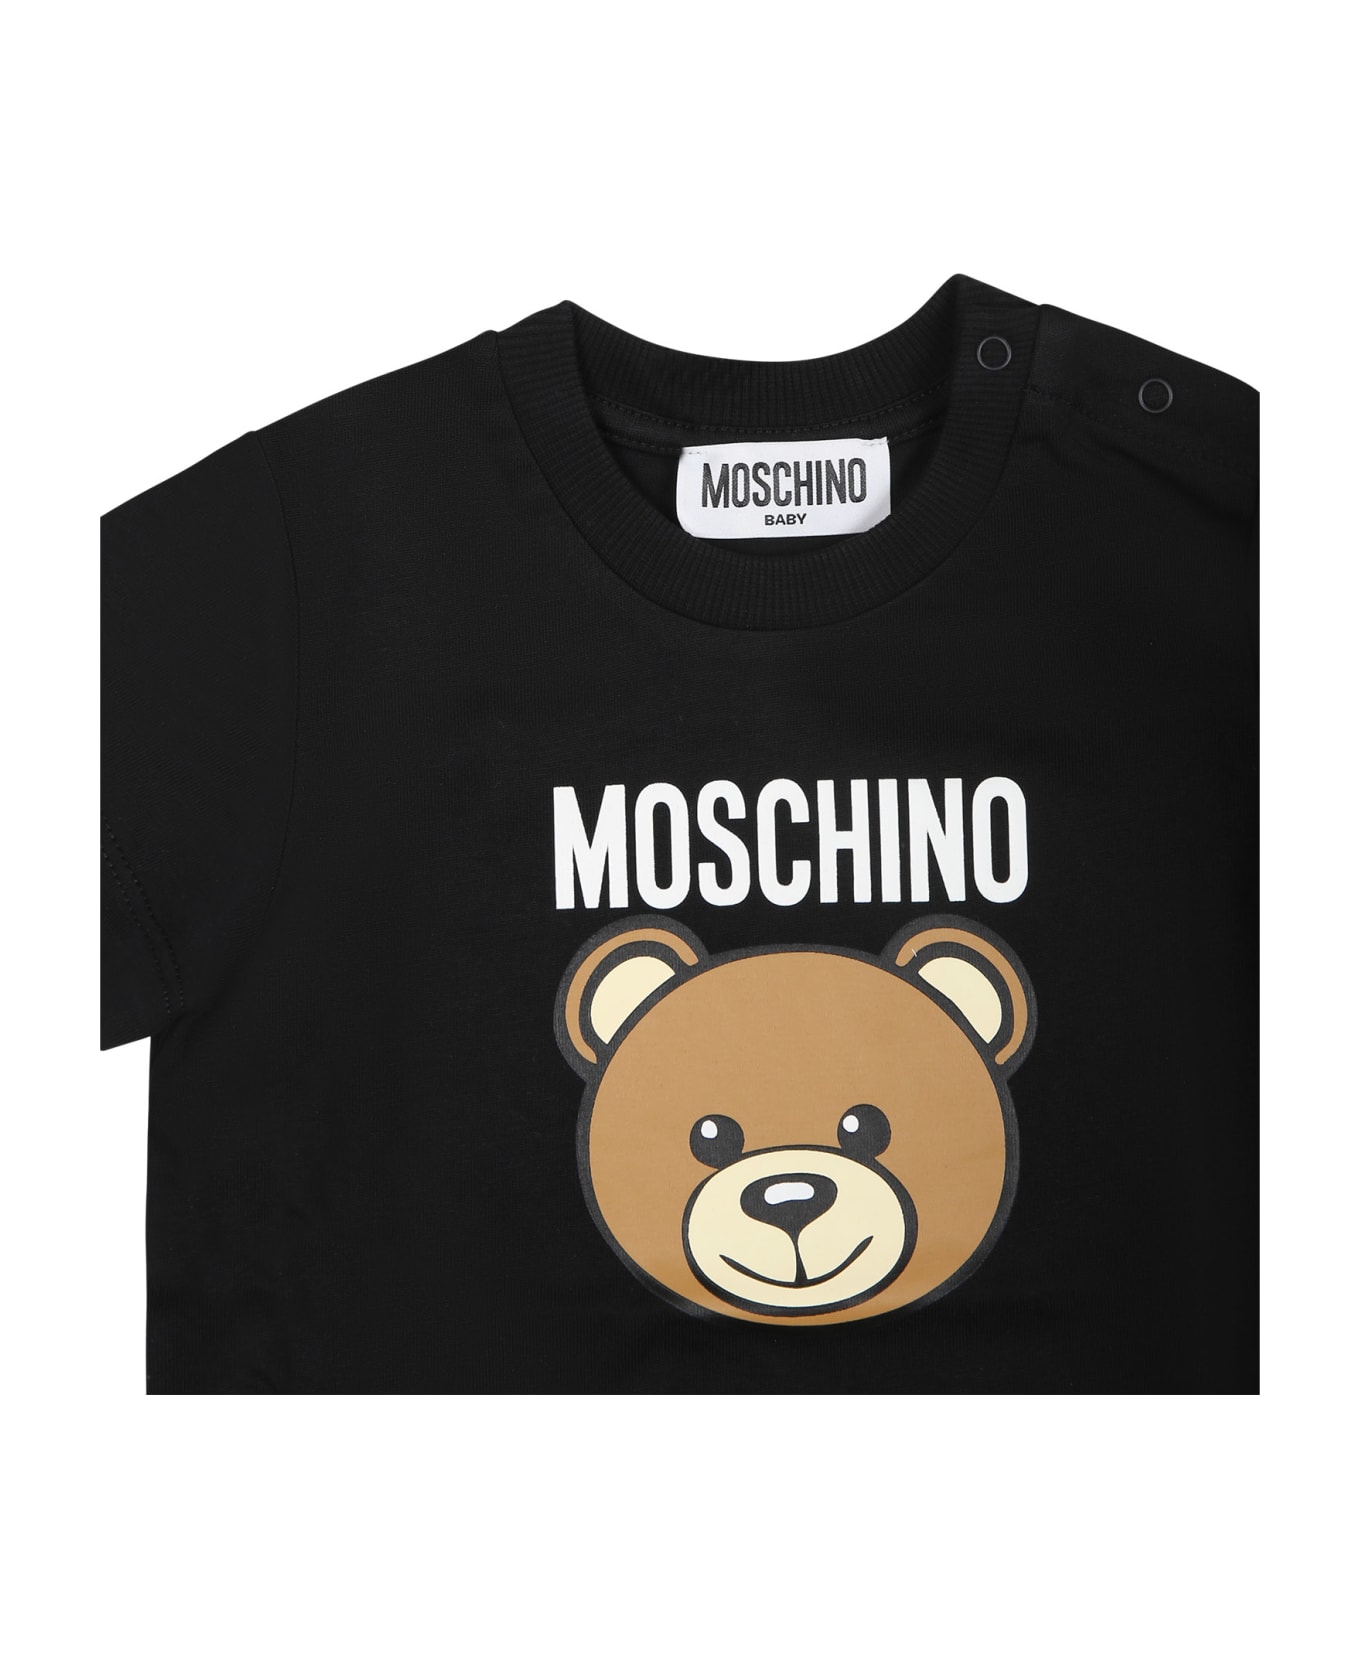 Moschino Black T-shirt For Baby Kids With Teddy Bear - Black